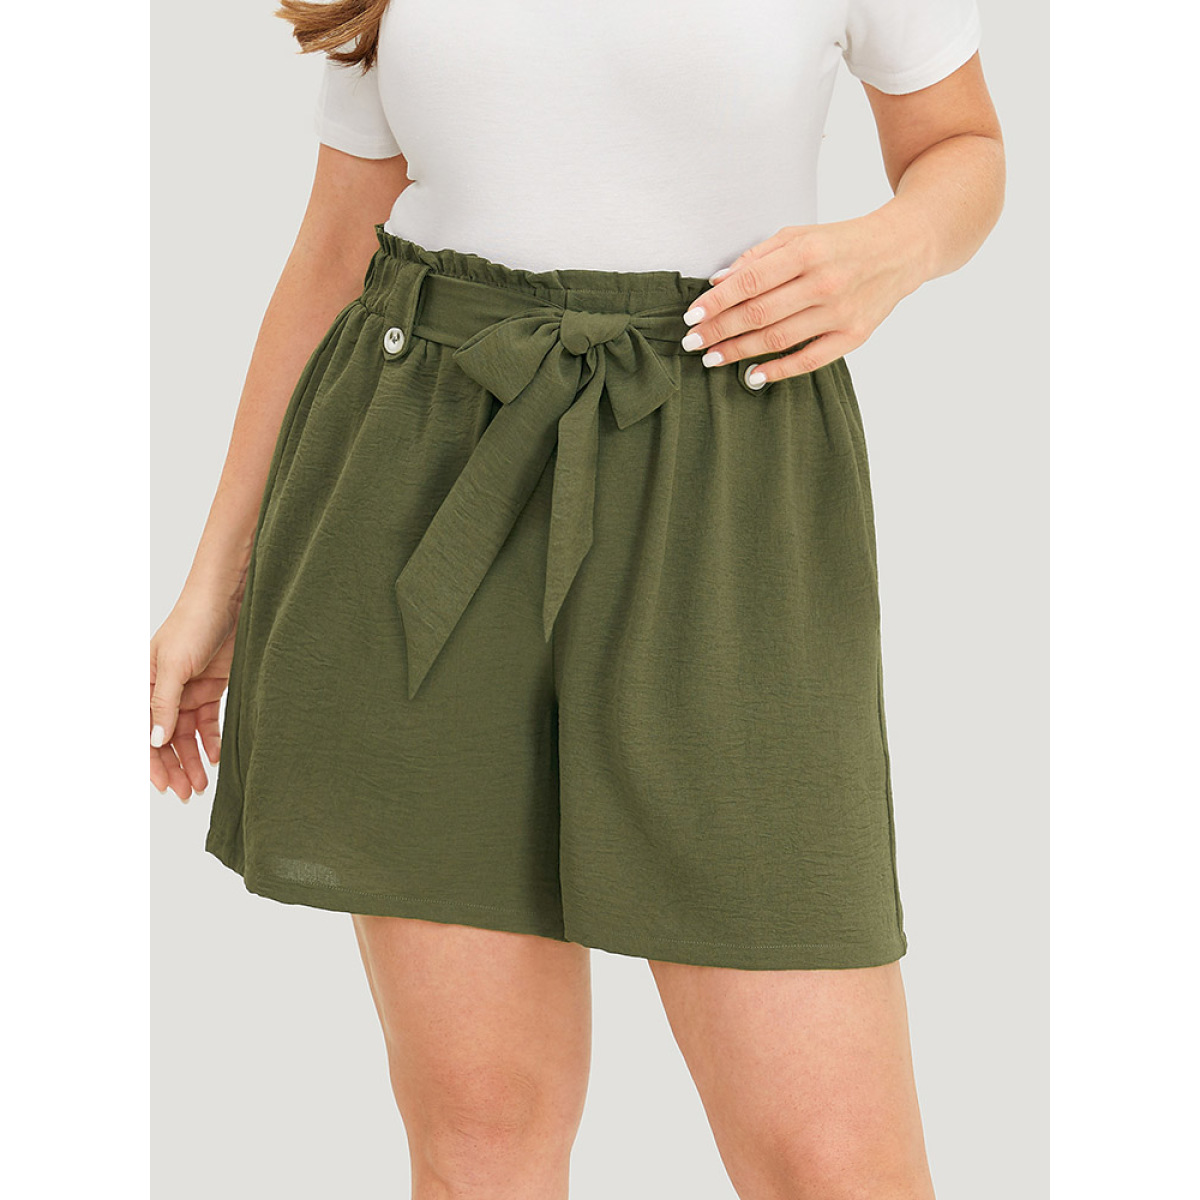 

Plus Size Solid Paperbag Waist Knot Front Belt Shorts Women ArmyGreen Casual Knotted Dailywear Shorts BloomChic